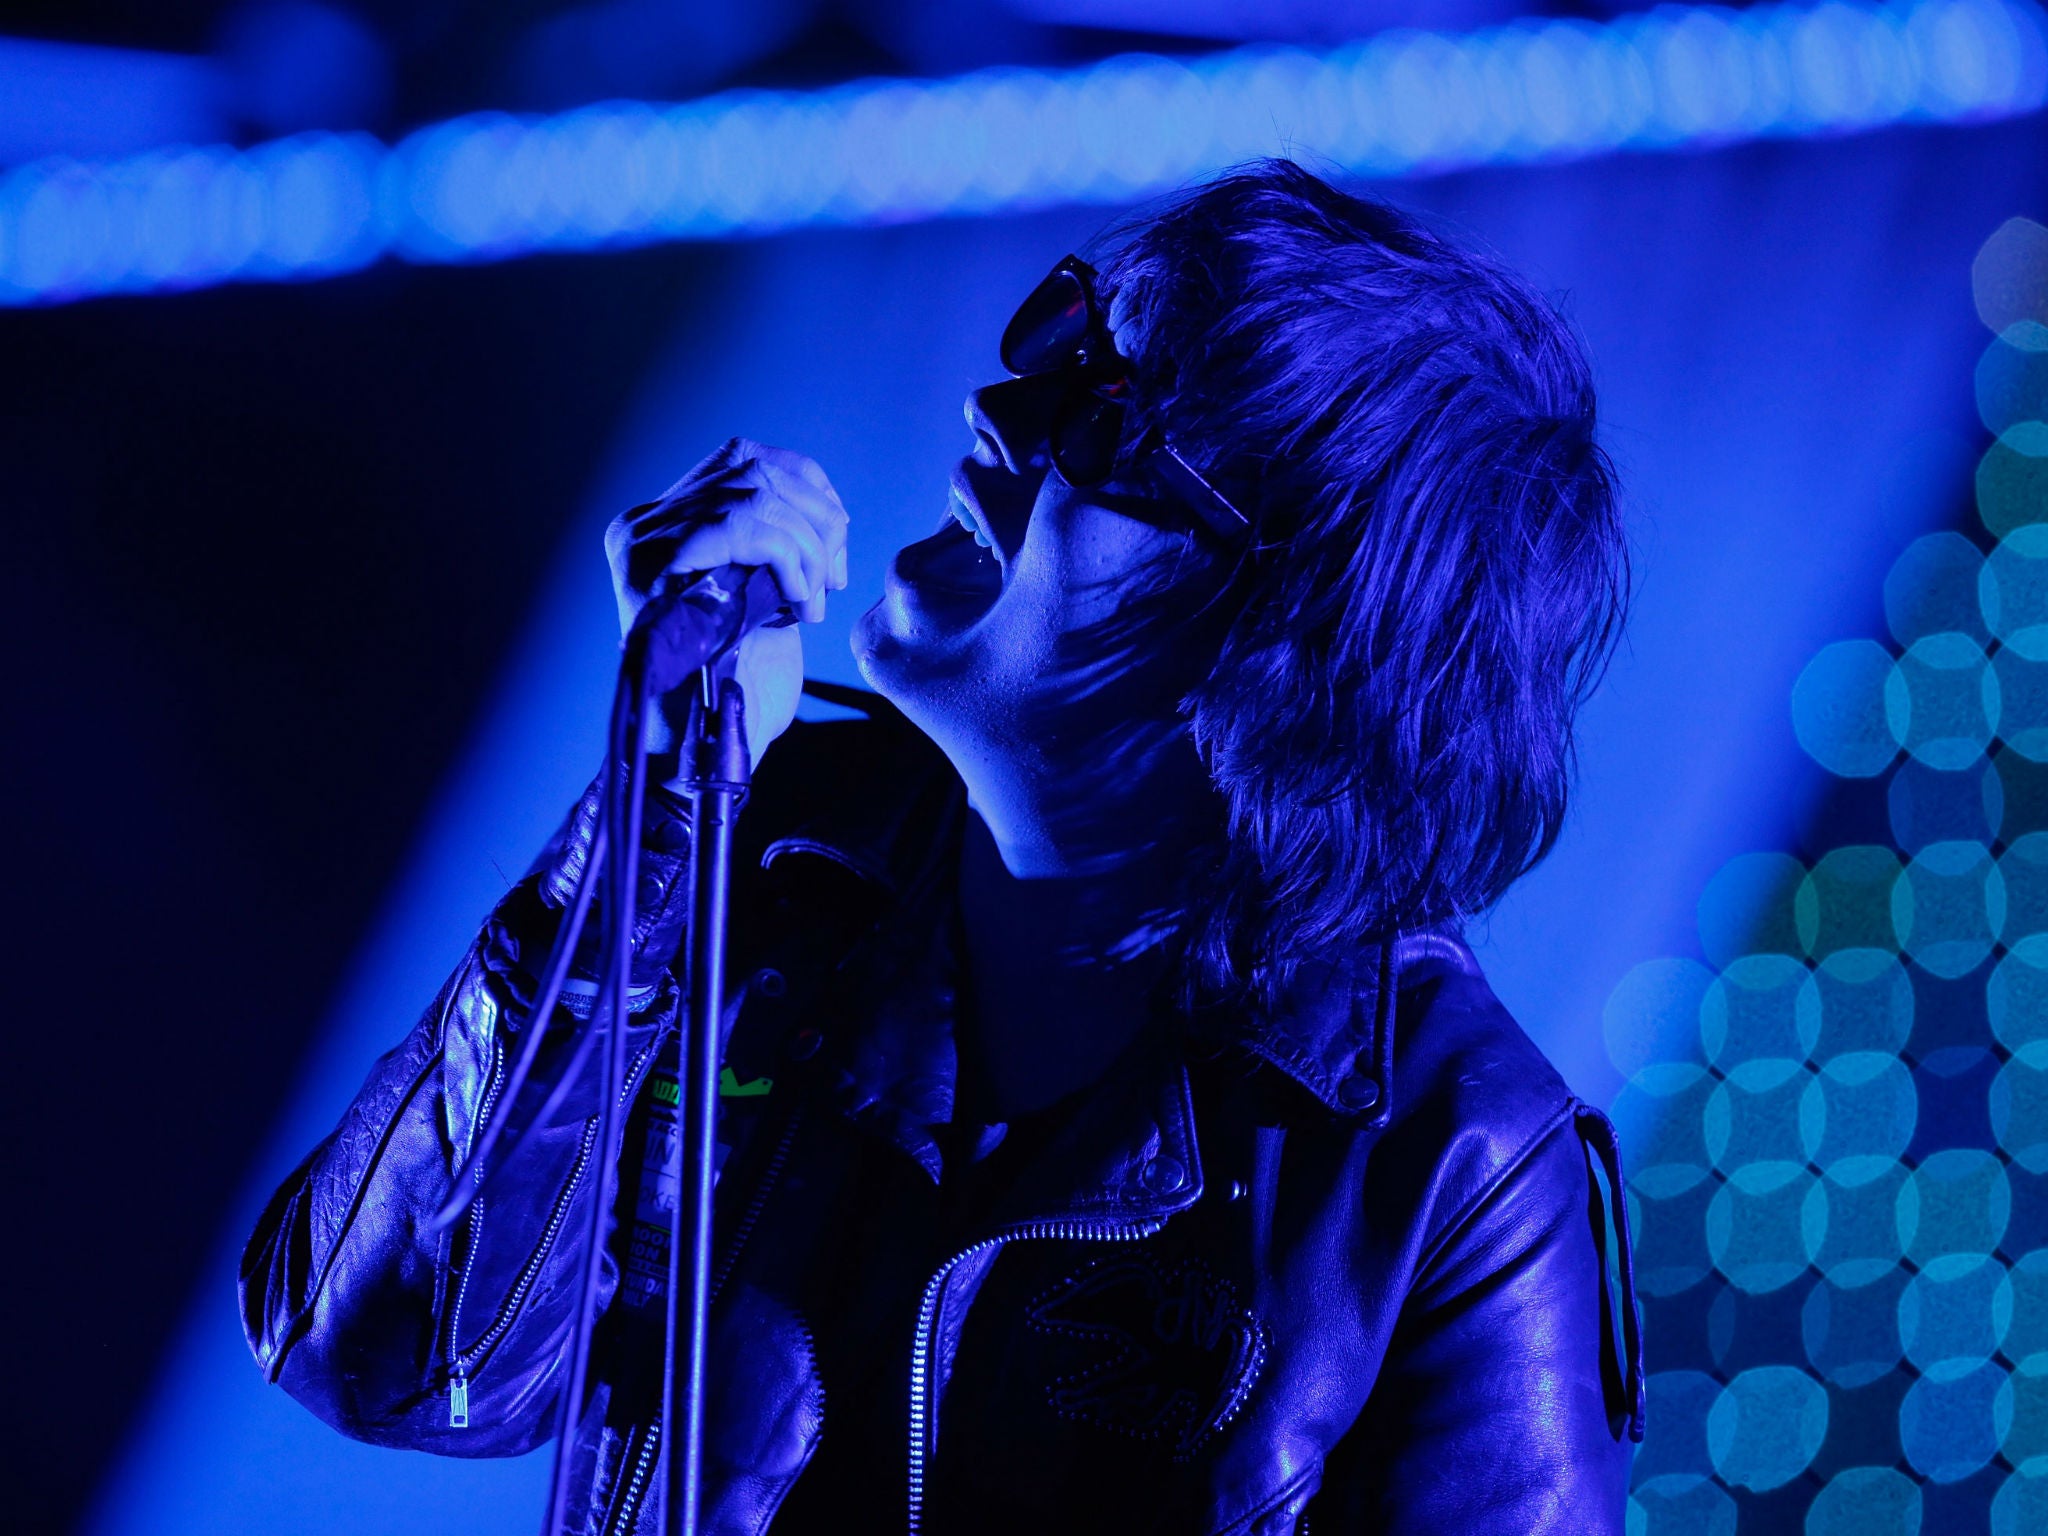 Julian Casablancas performs at Reading Festival as frontman of New York rock band The Strokes